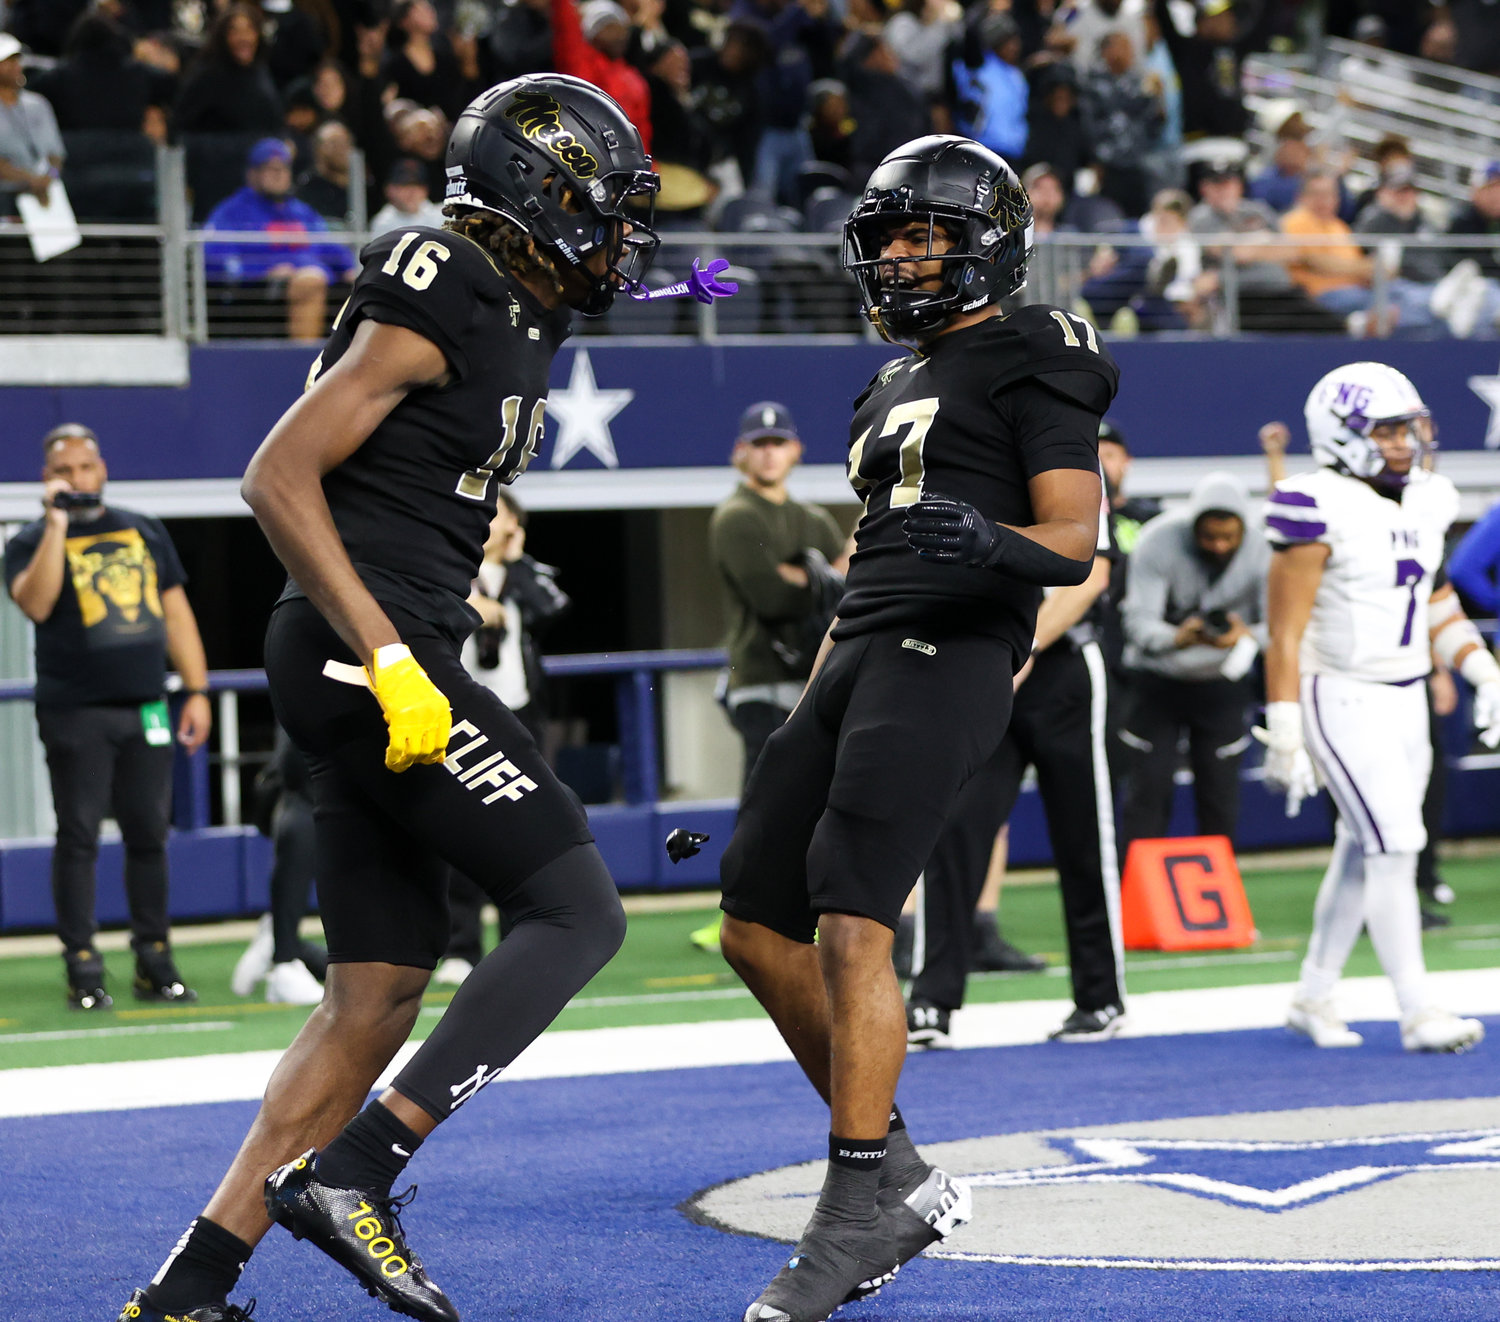 South Oak Cliff wide receiver Trey Jackson (16) and wide receiver Rickey Evans (17) celebrate after a touchdown during the Class 5A Division II football state championship game between South Oak Cliff and Port Neches-Groves in Arlington, Texas, on Dec. 16, 2022.